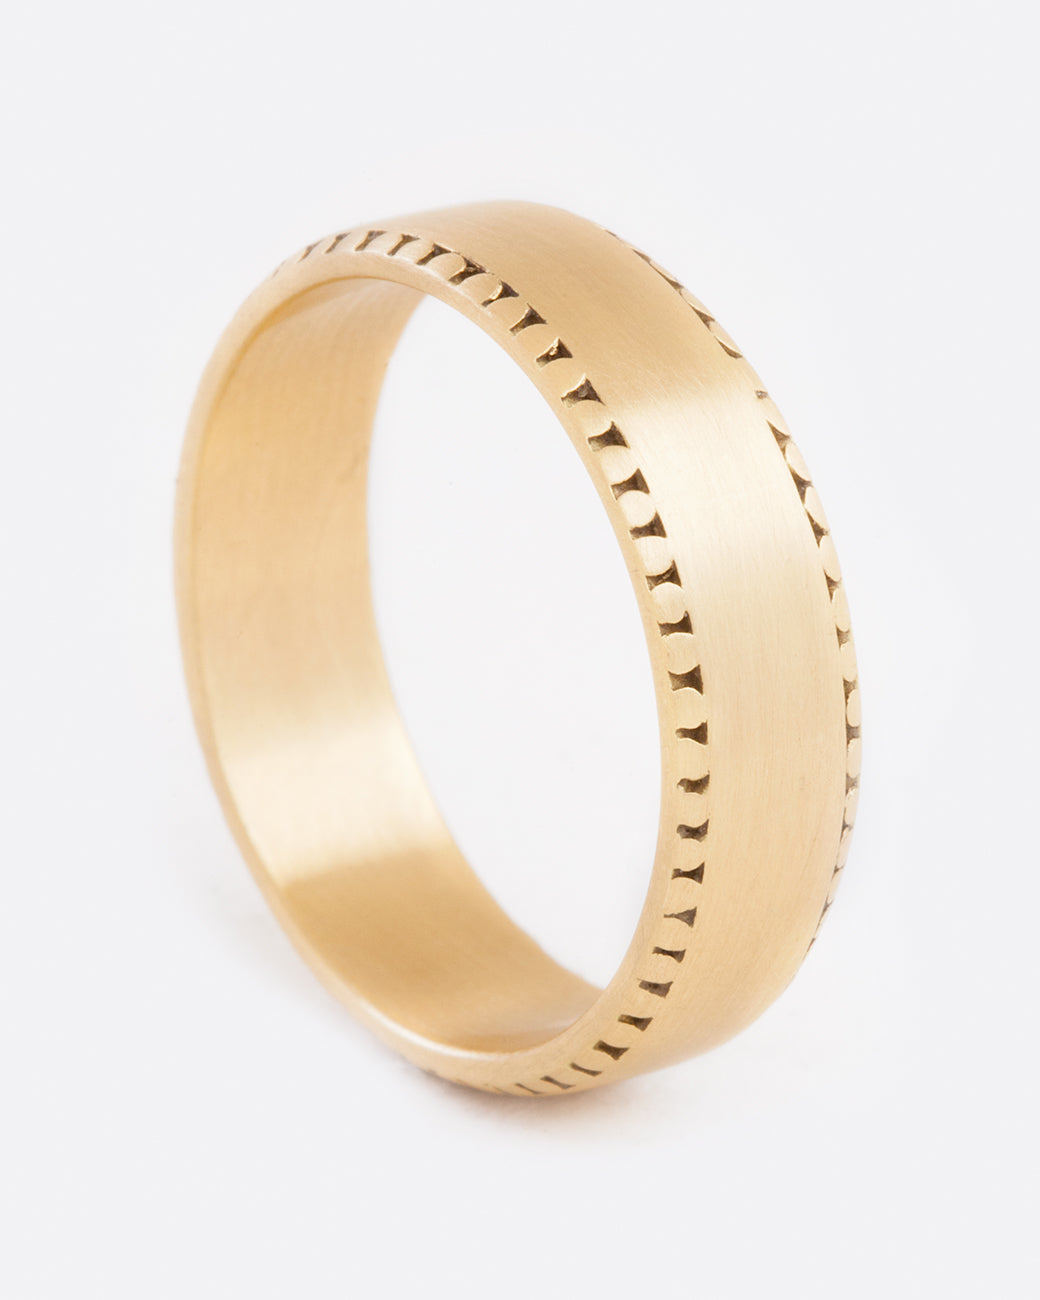 A front view of a yellow gold ring with a matte finish. The edges of the ring has light small dots around the top and bottom. They aren't super strong and almost look slightly worn away.